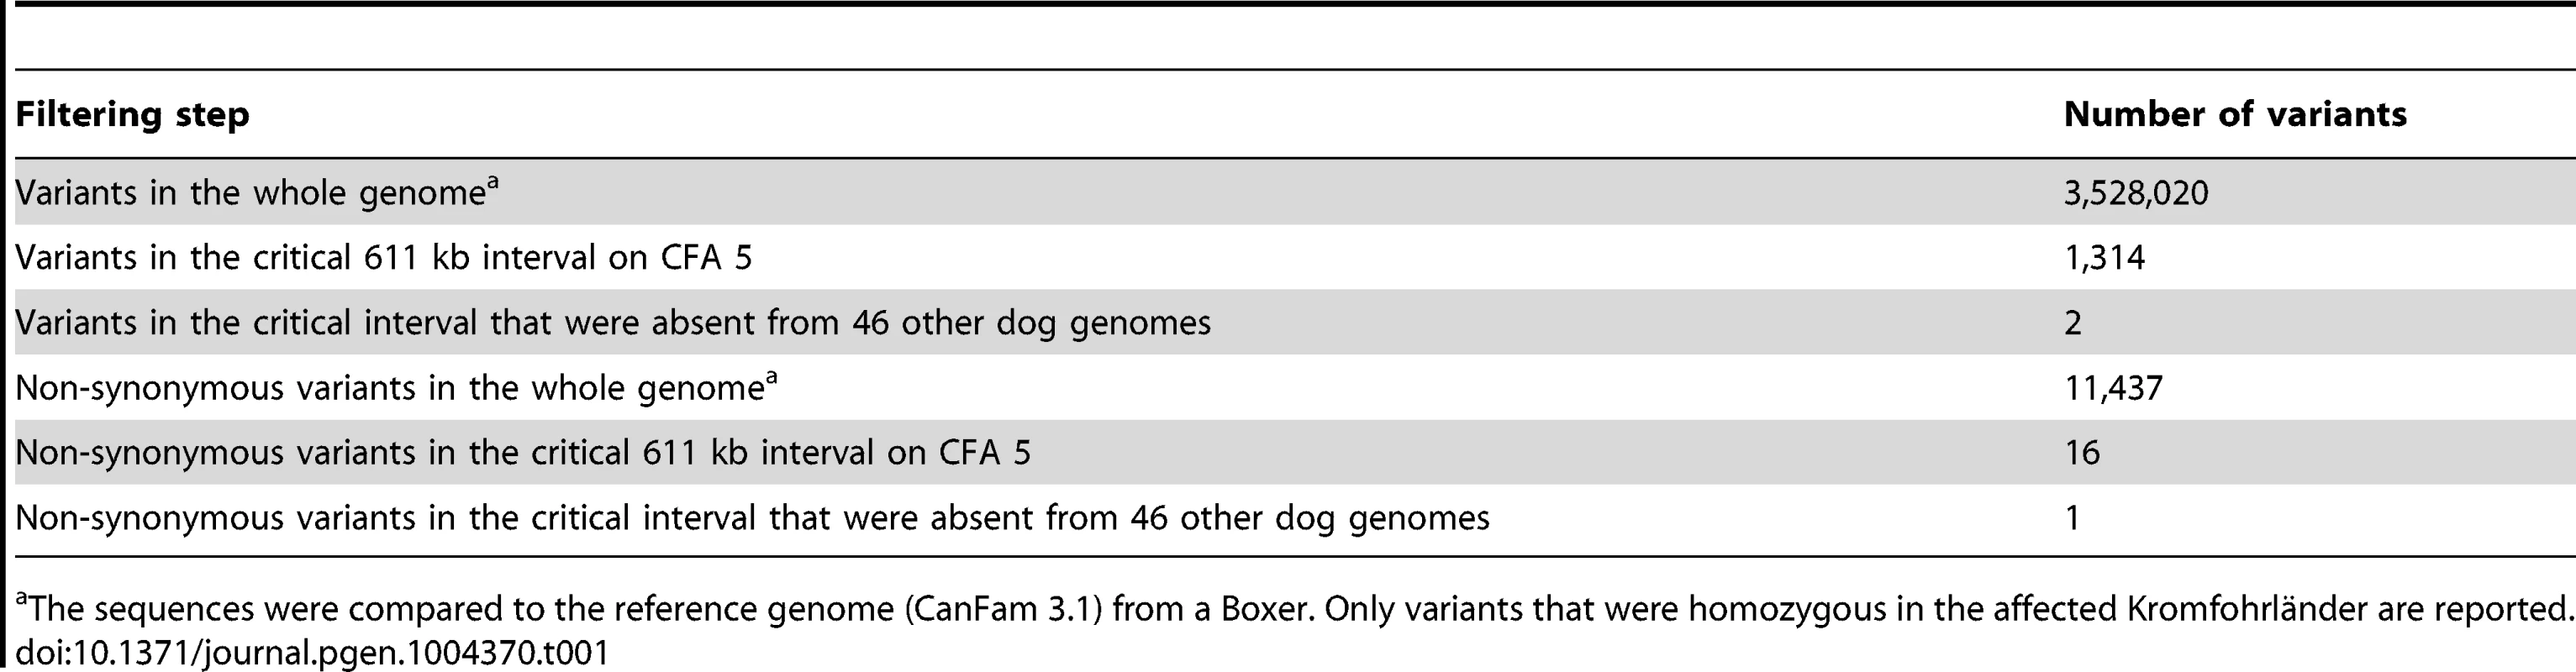 Variants detected by whole genome re-sequencing of an affected Kromfohrländer.